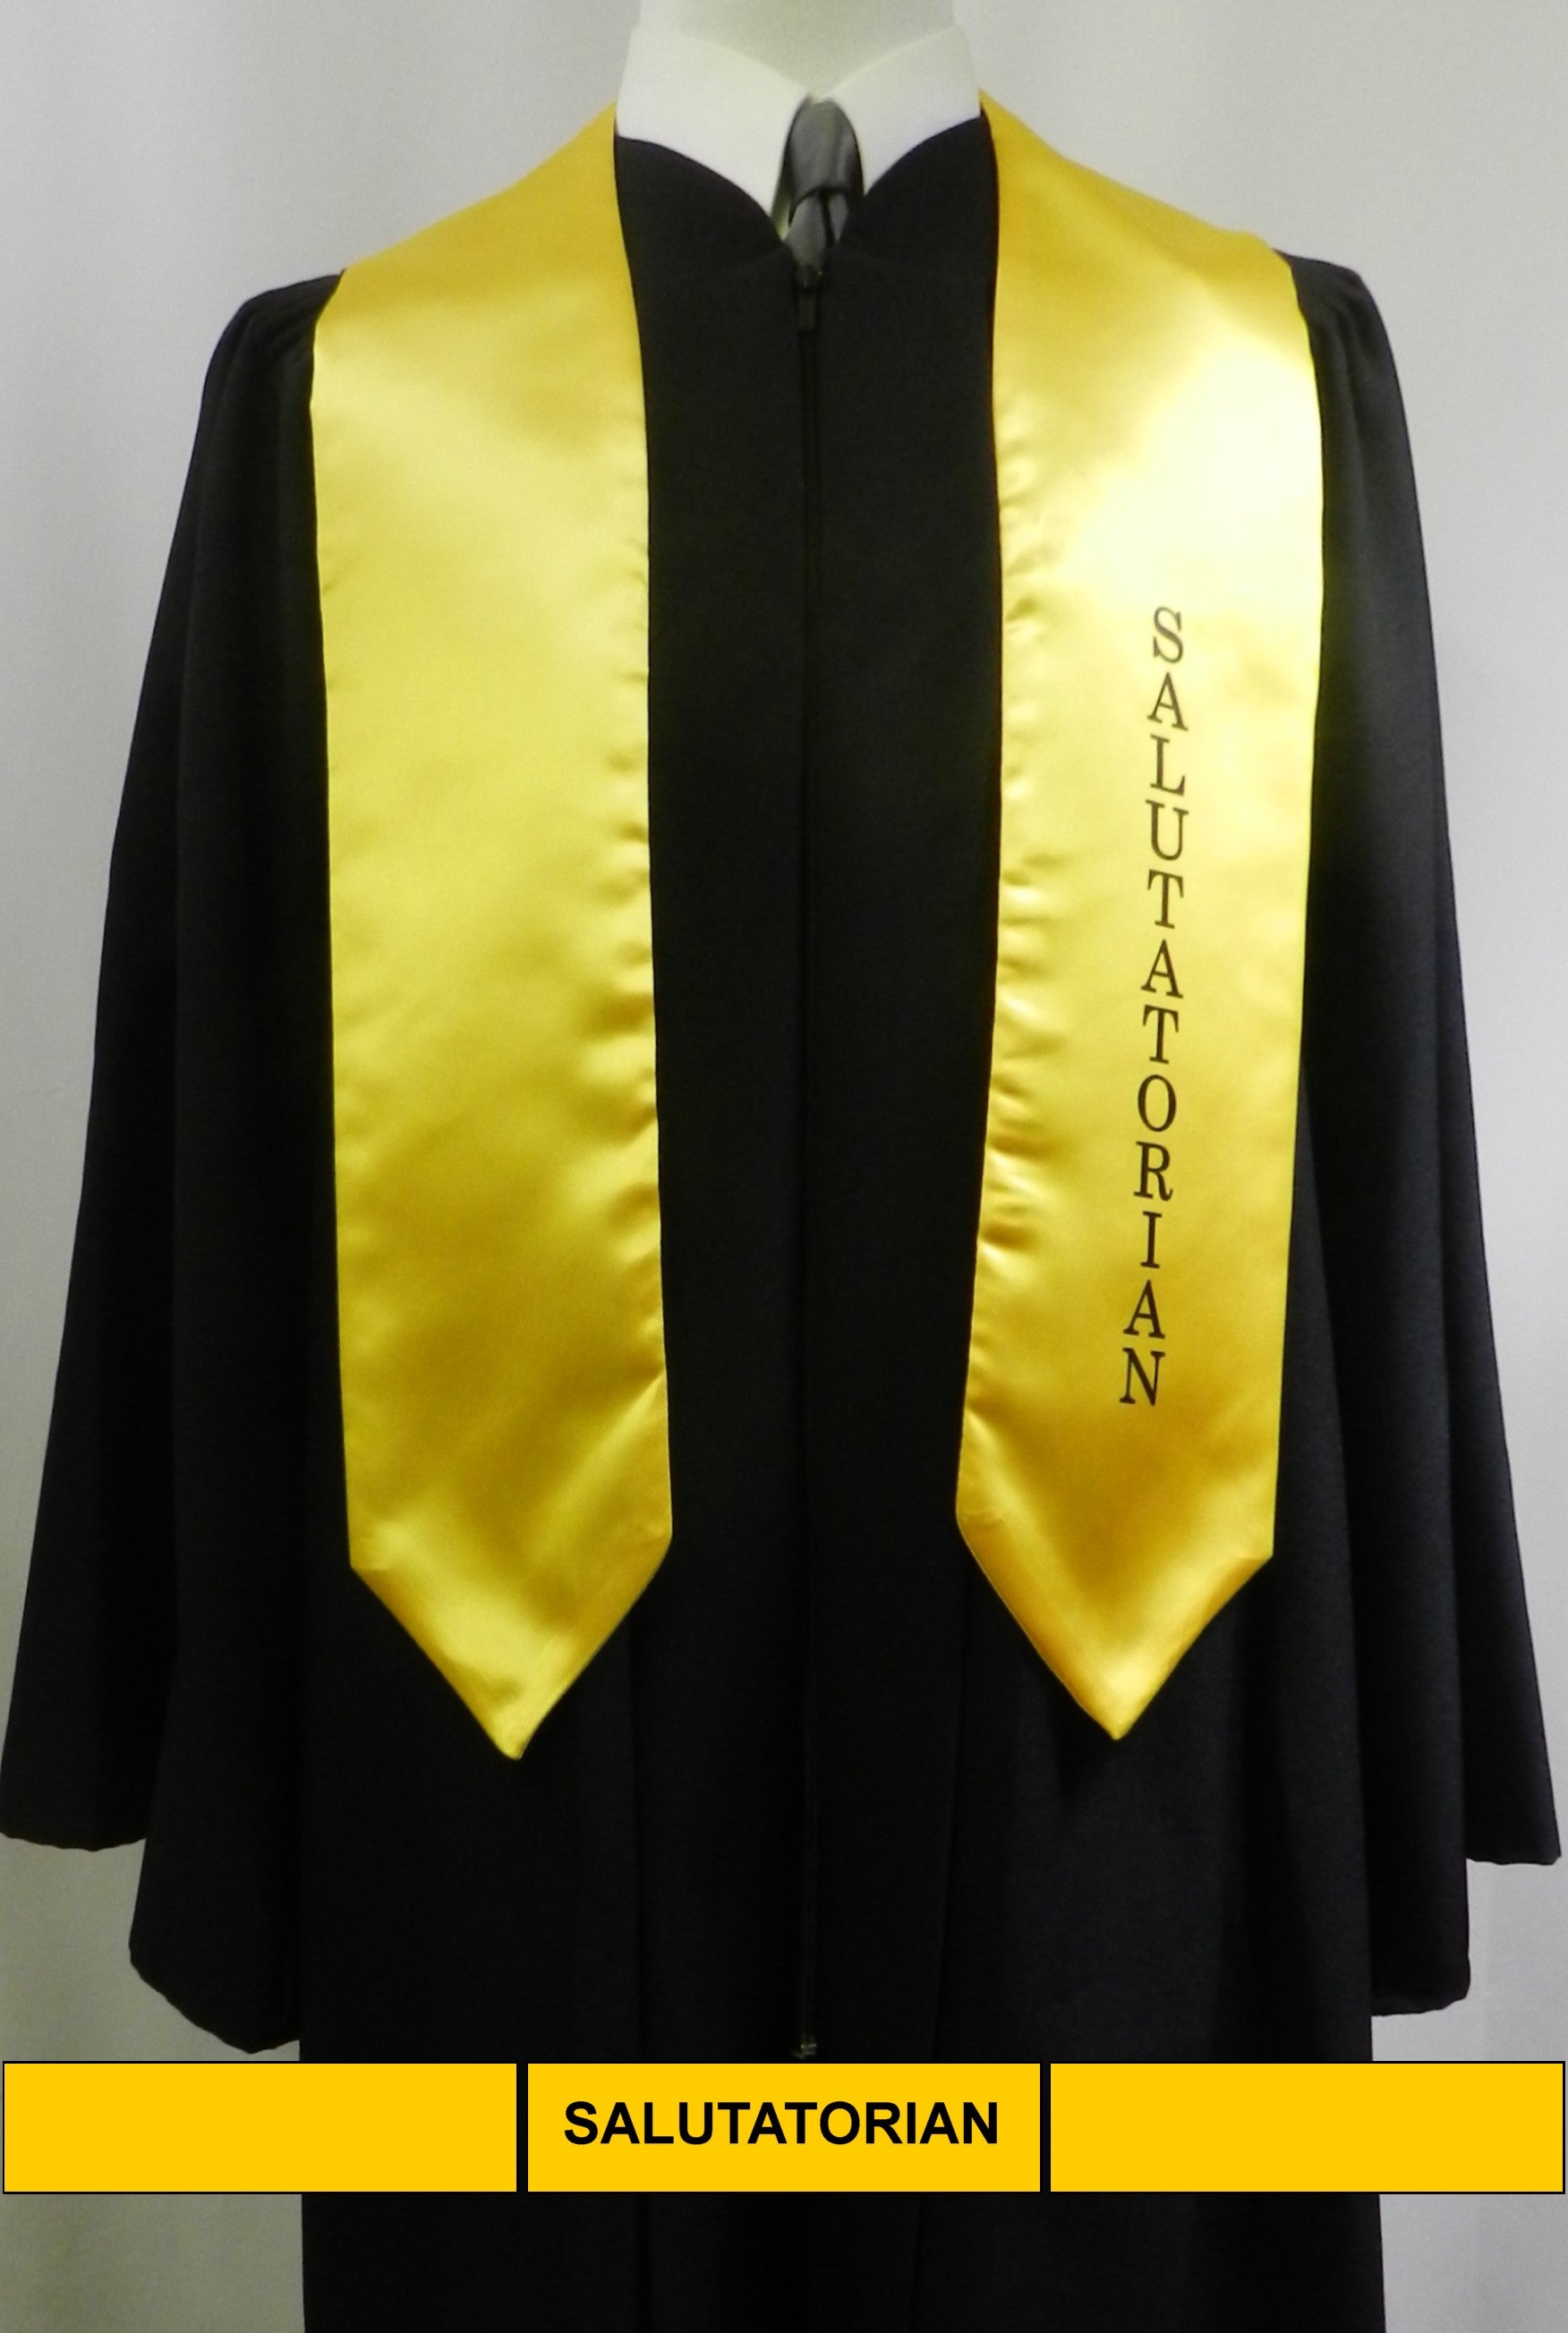 Graduation gown, cap, and stole sale : r/UWMilwaukee